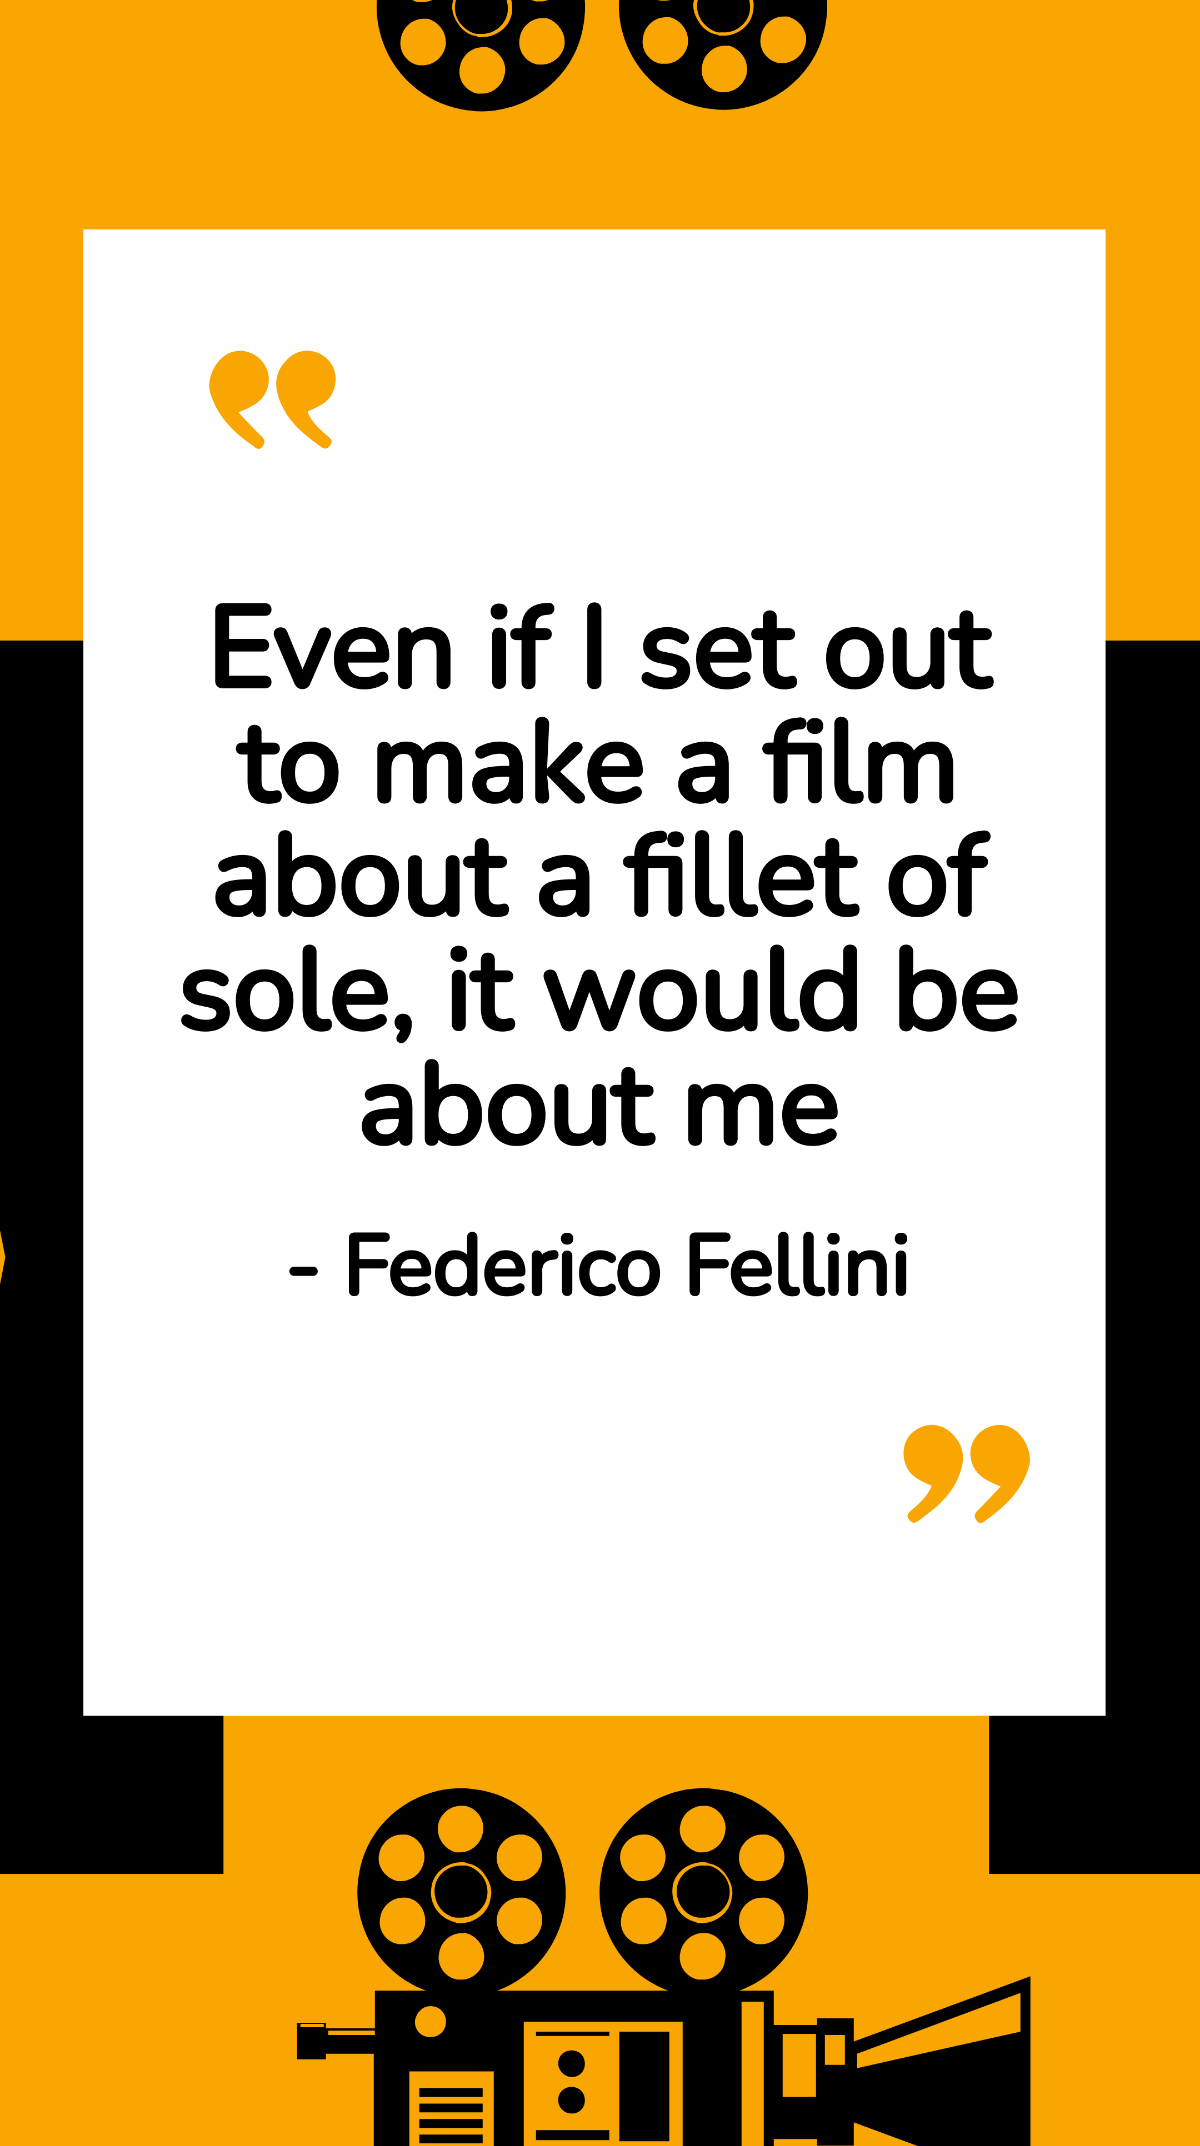 Free Federico Fellini - Even if I set out to make a film about a fillet of sole, it would be about me Template